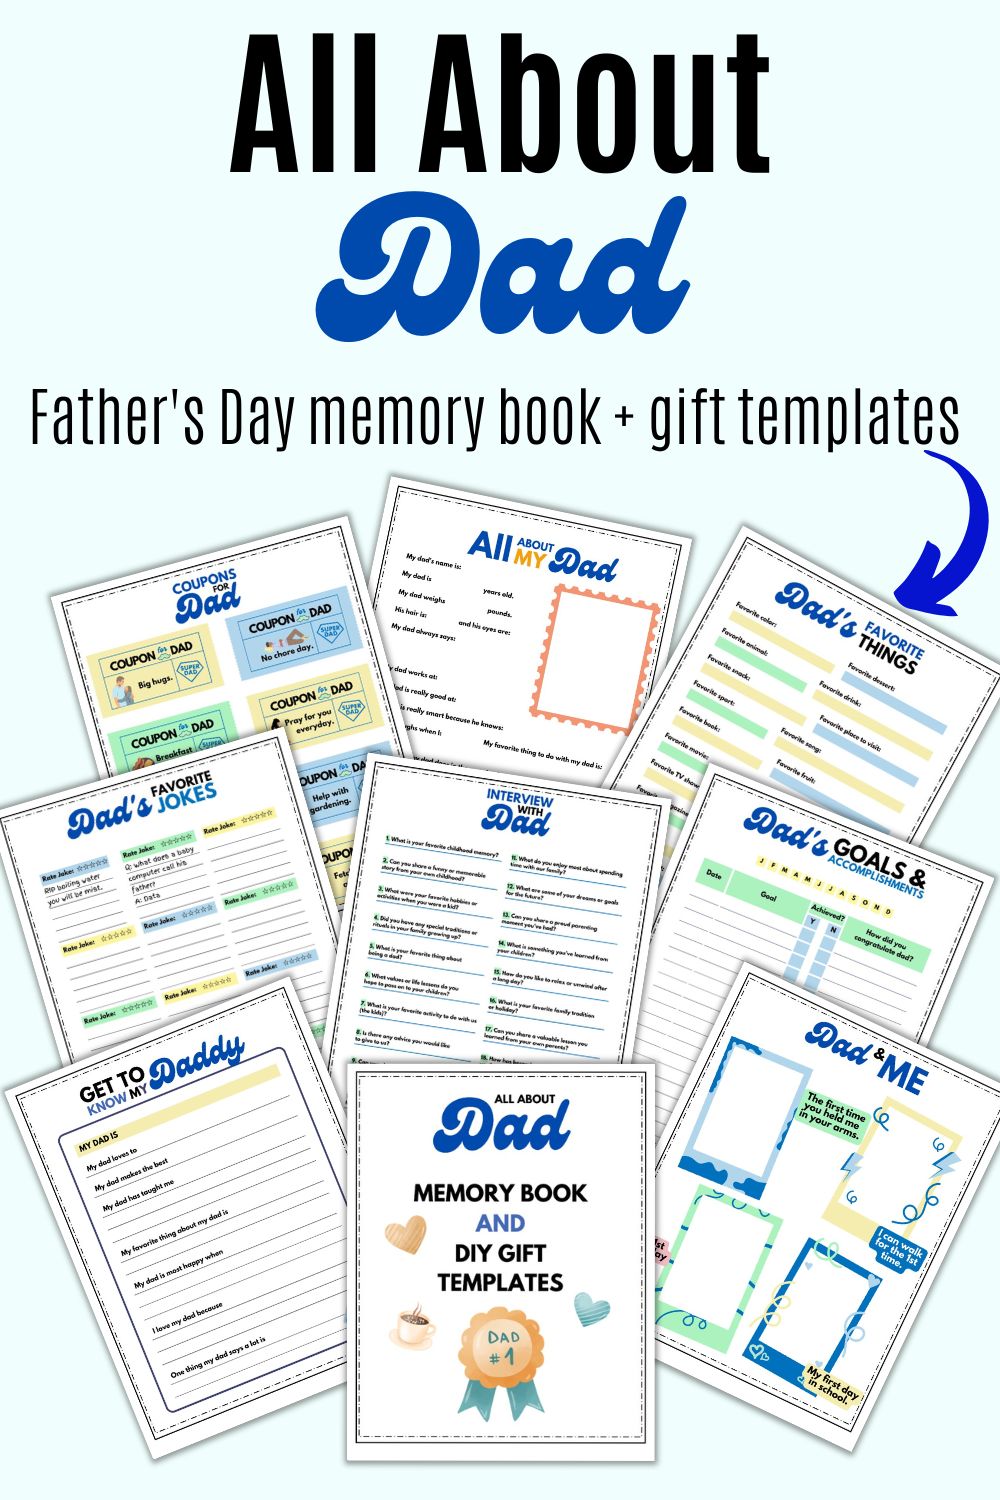 Father's Day Memory Book & Gift Templates mockup